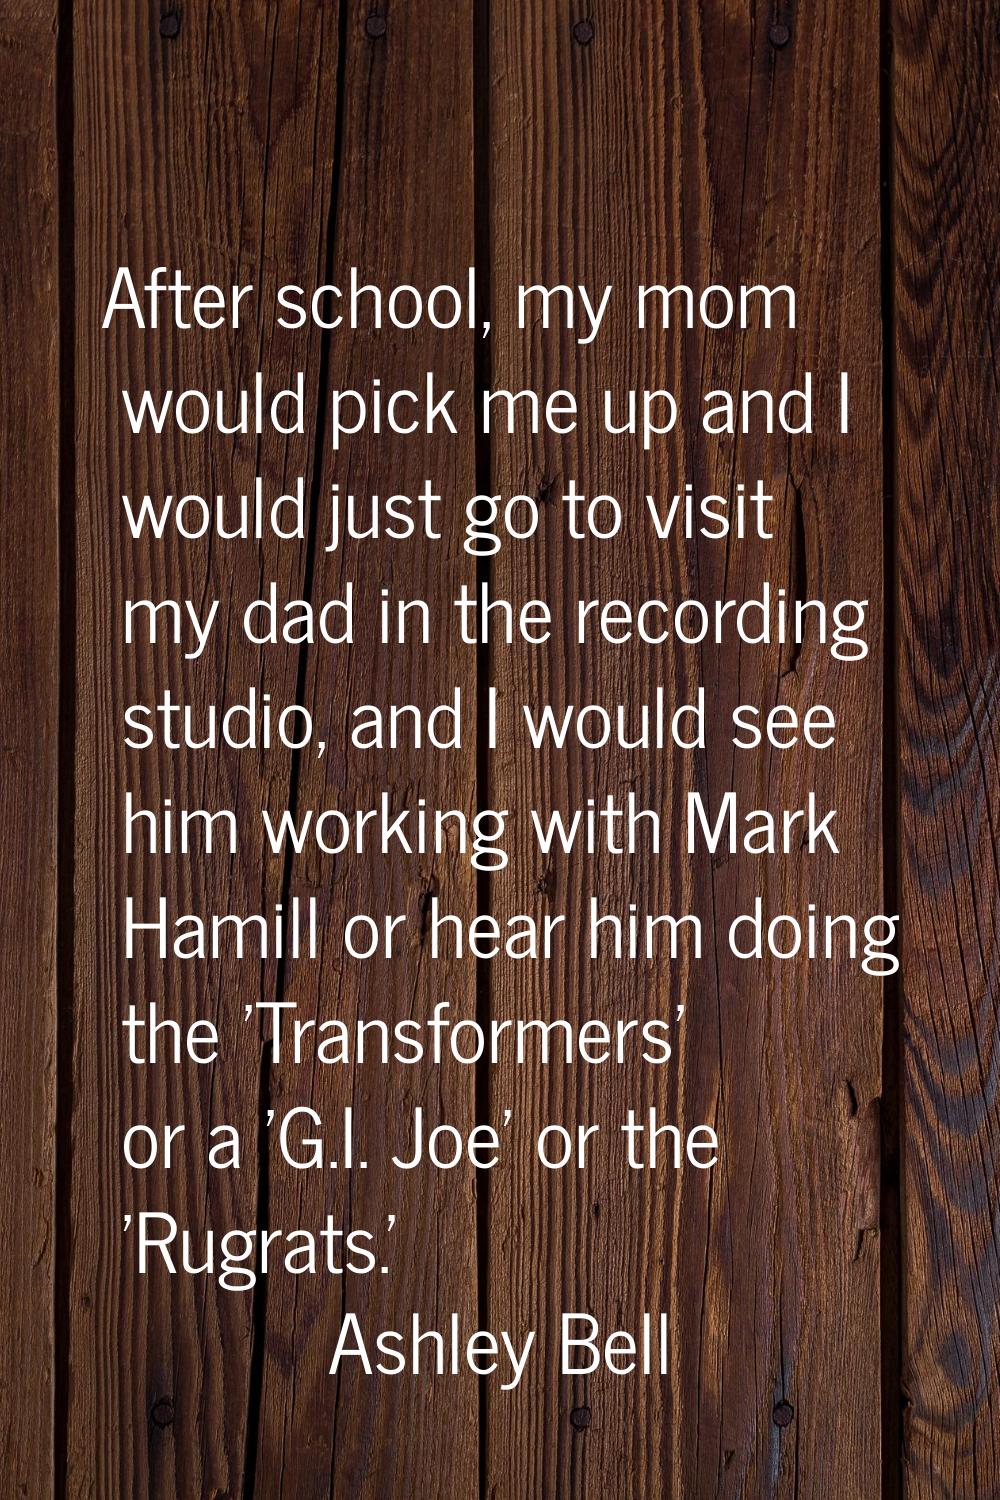 After school, my mom would pick me up and I would just go to visit my dad in the recording studio, 